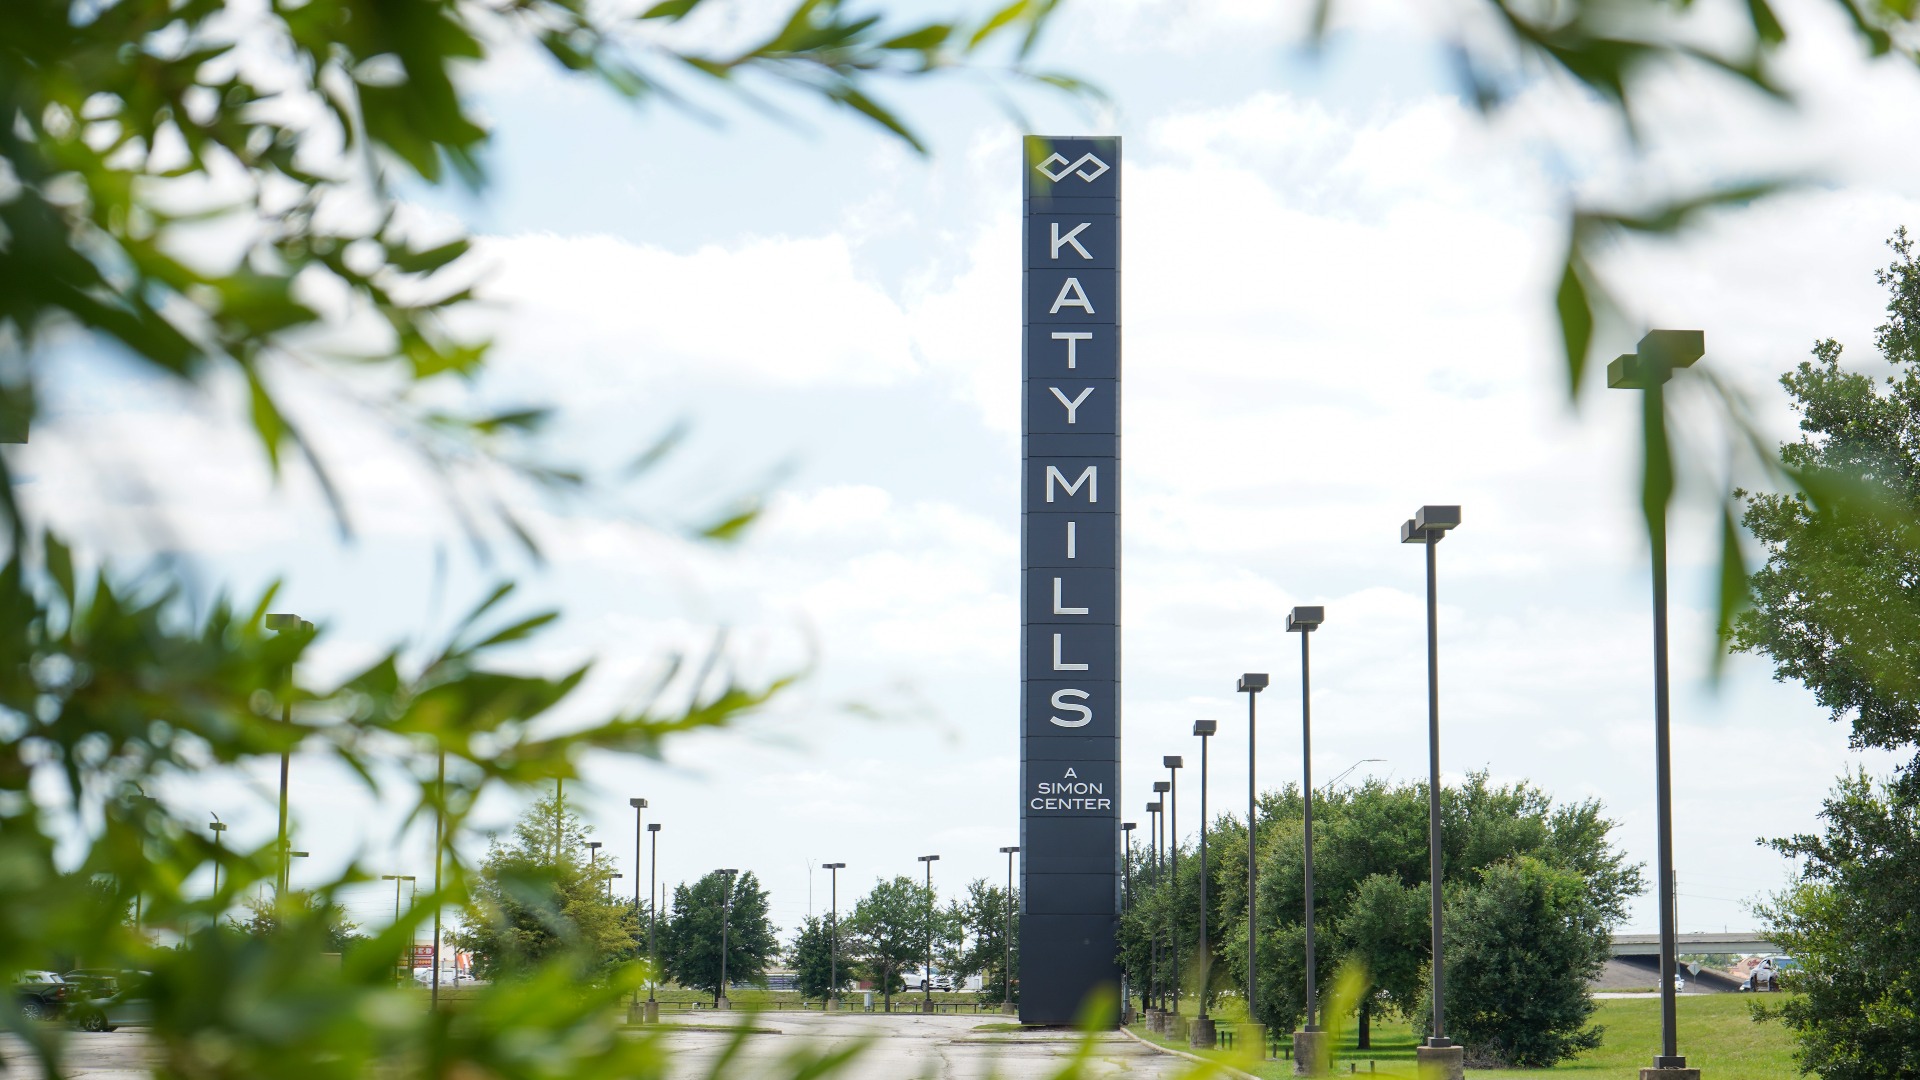 Photo of Katy Mills Mall tower with trees in foreground 